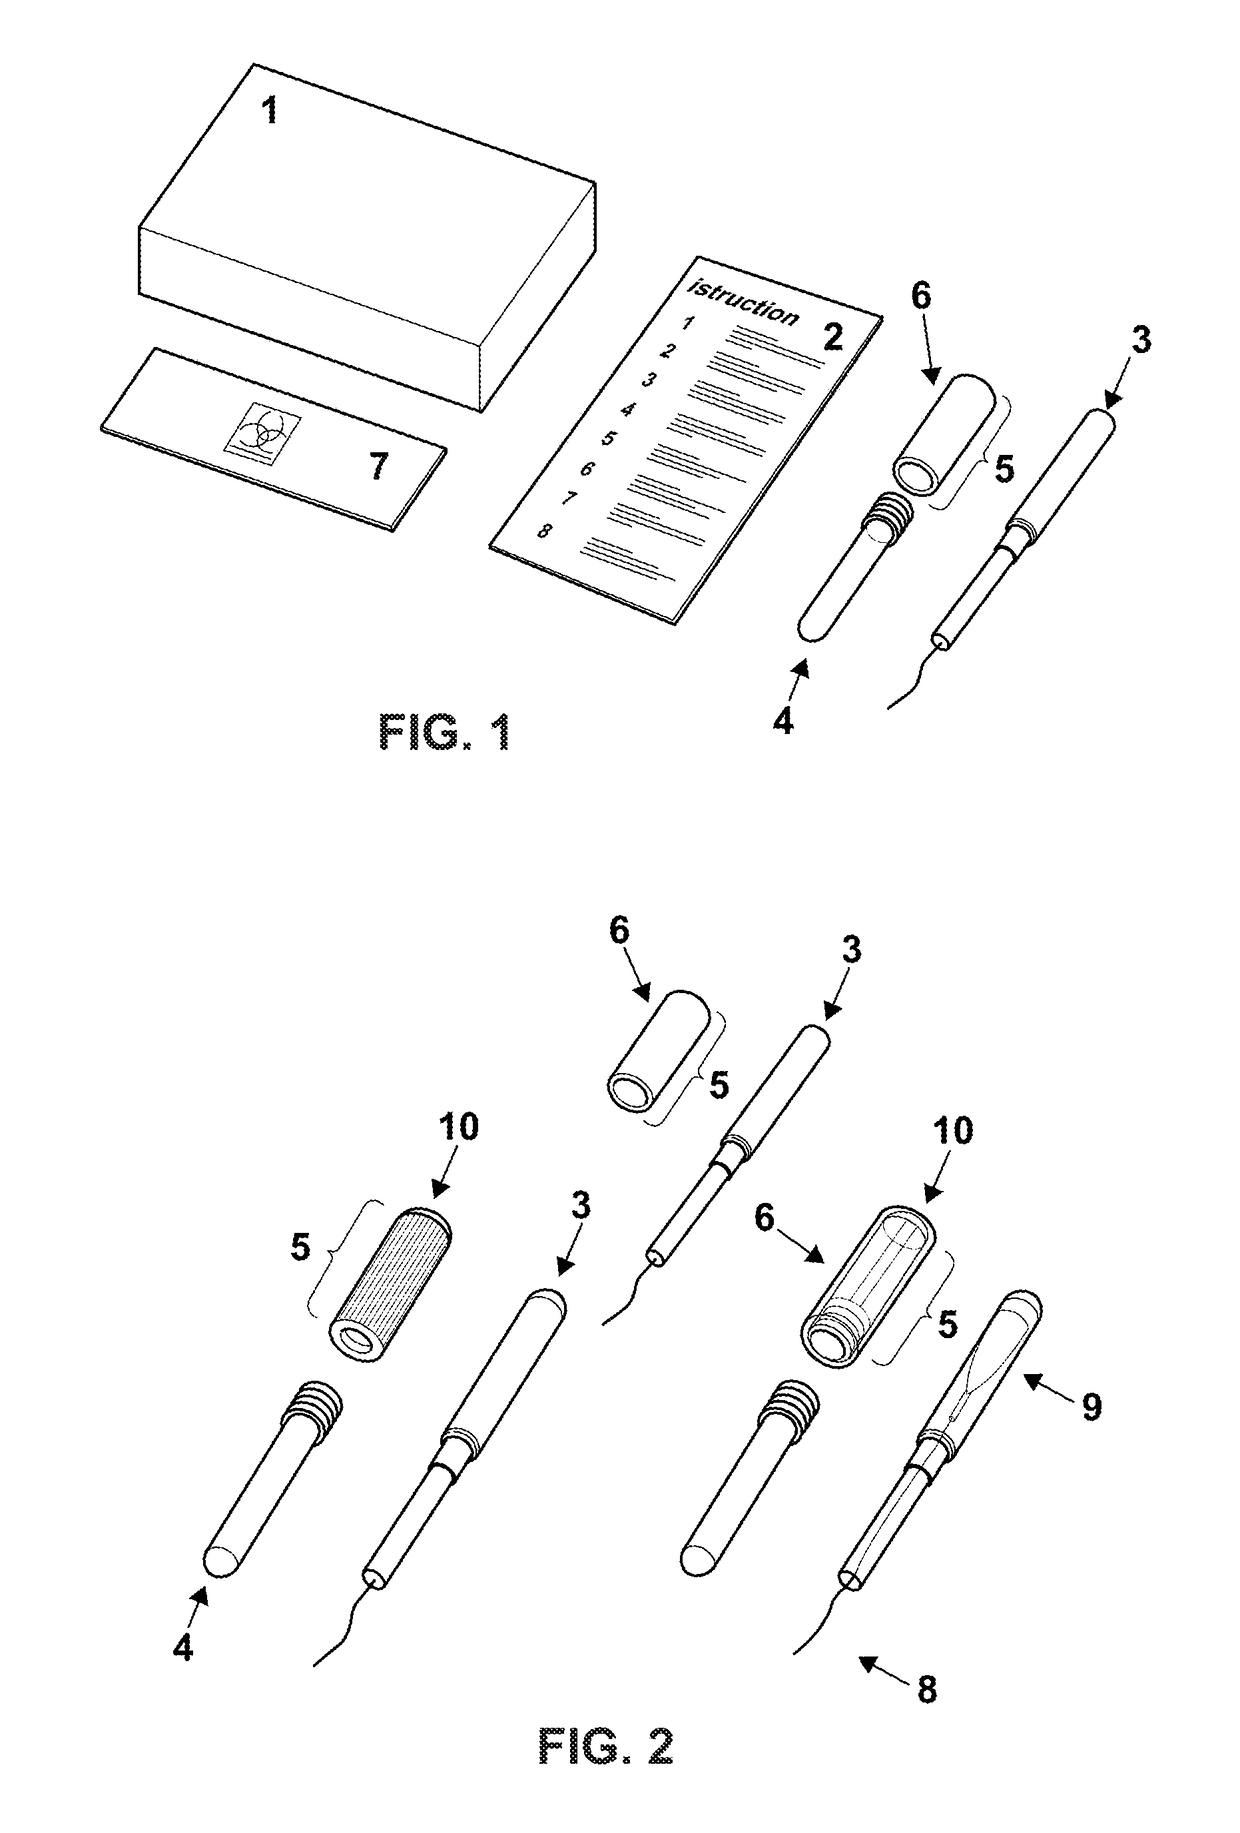 Self-collection device and kit for collecting cervical and vaginal cells